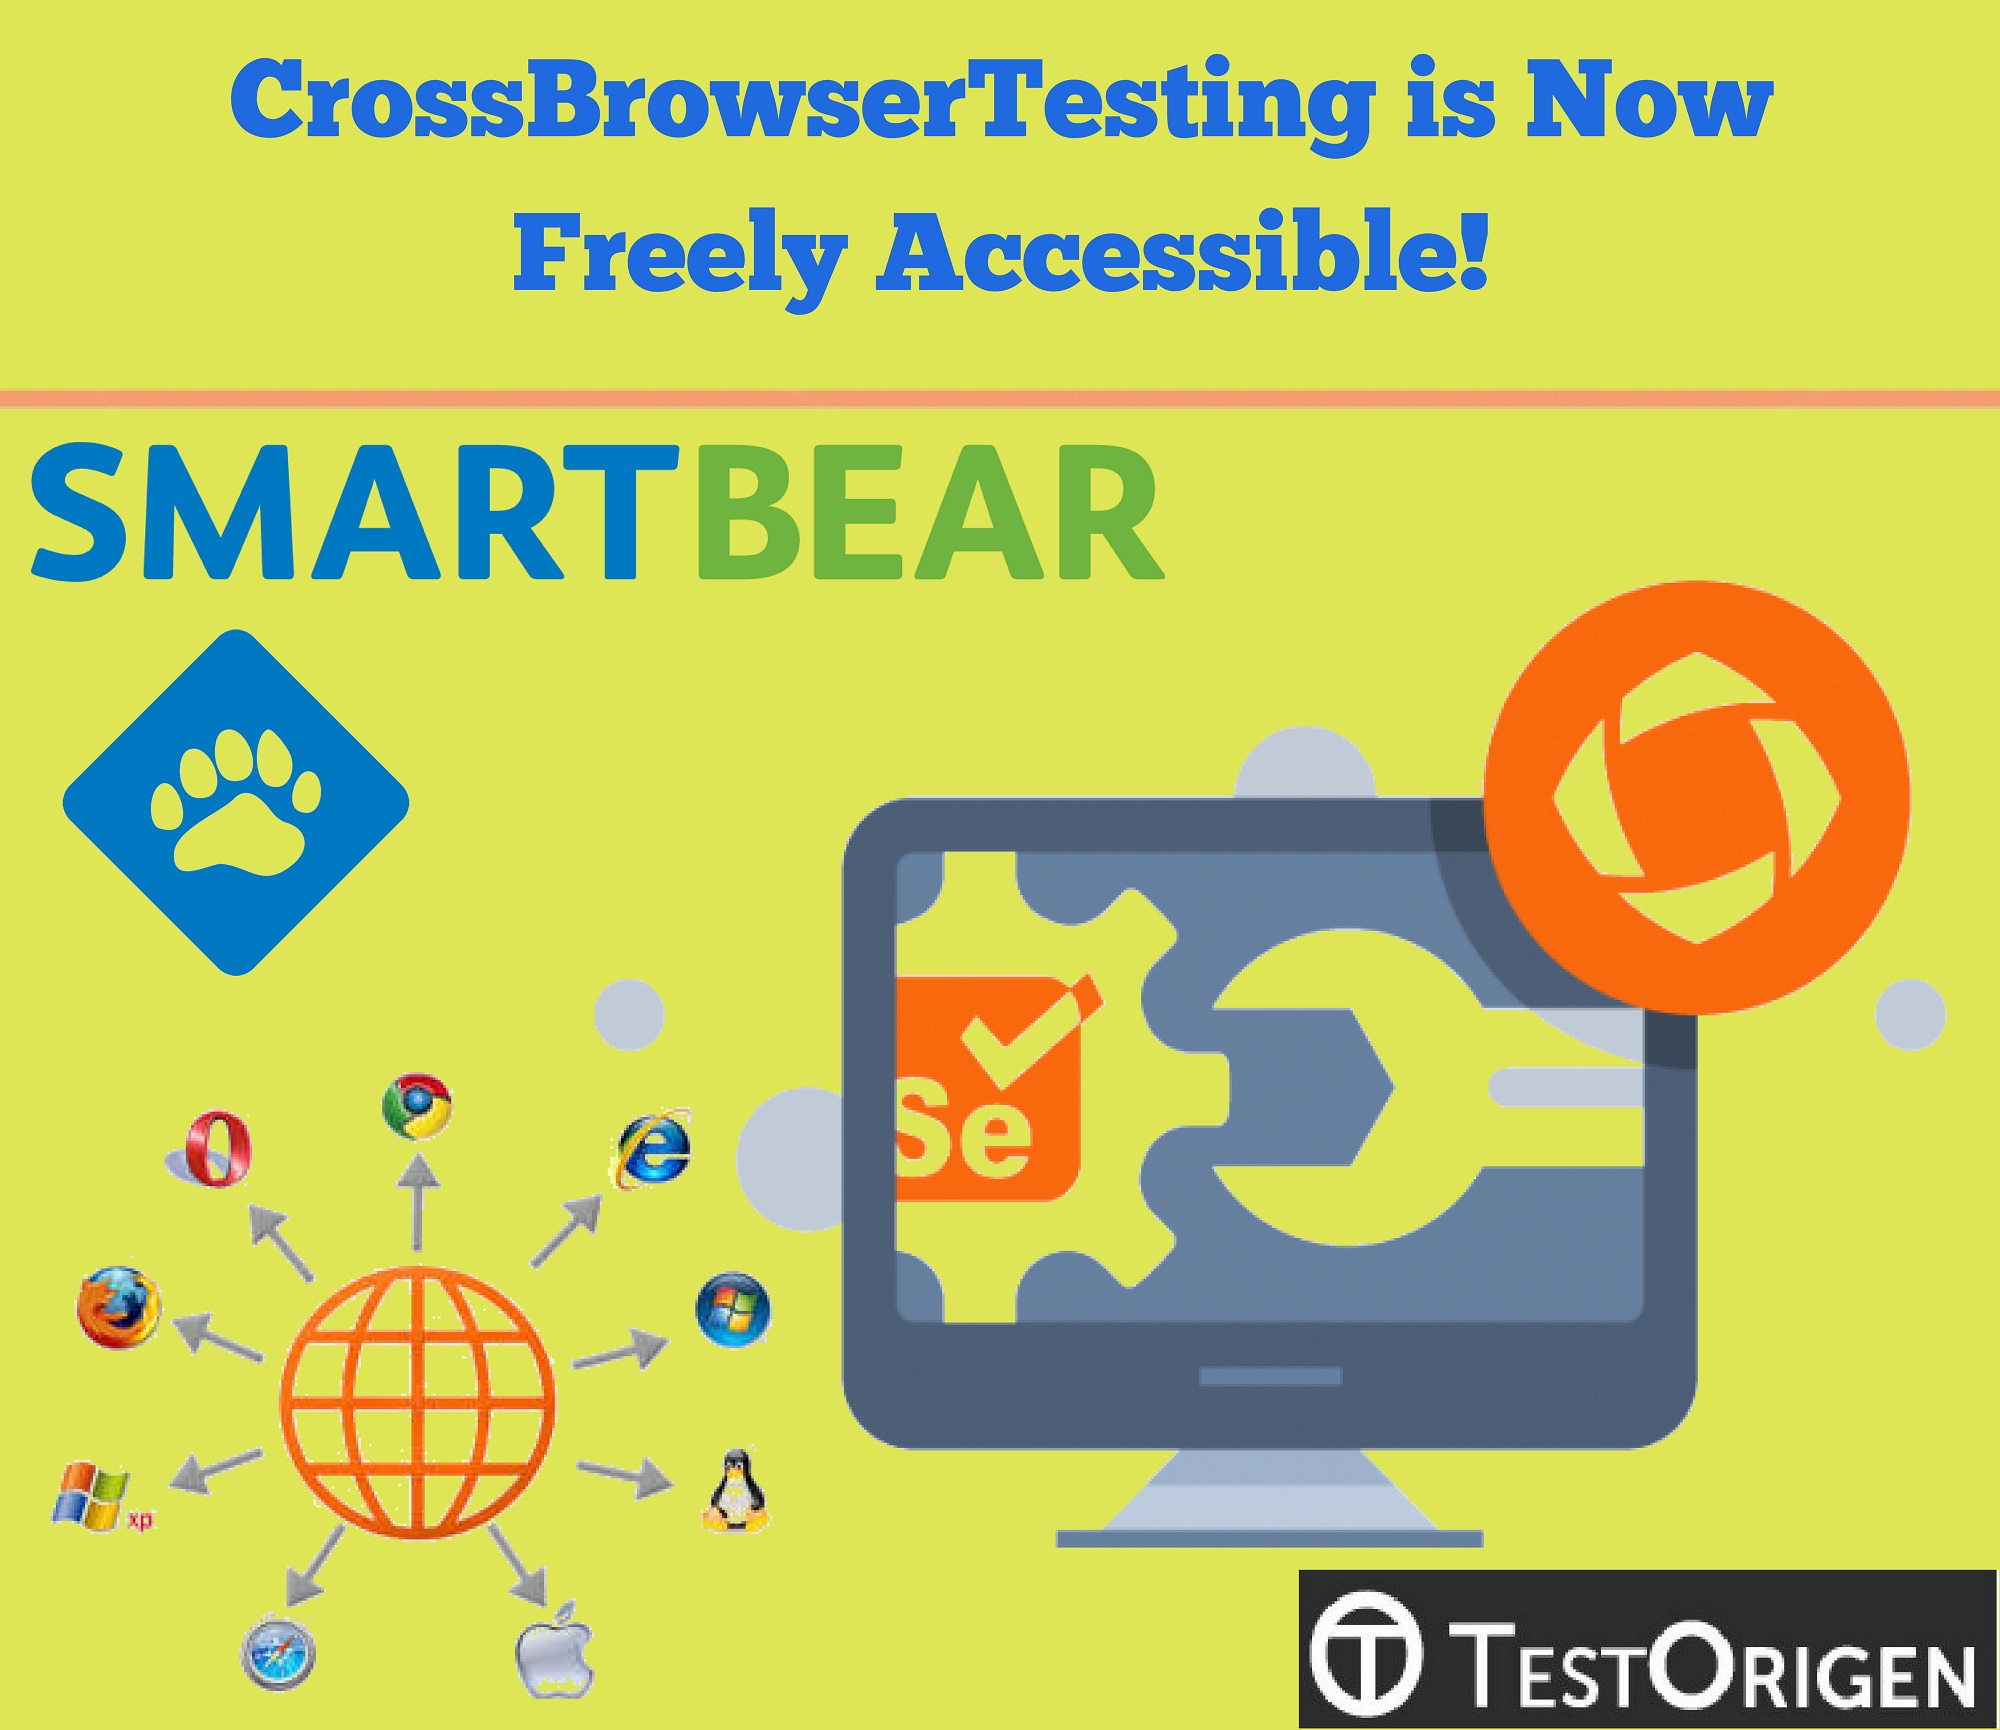 CrossBrowserTesting is Now Freely Accessible!